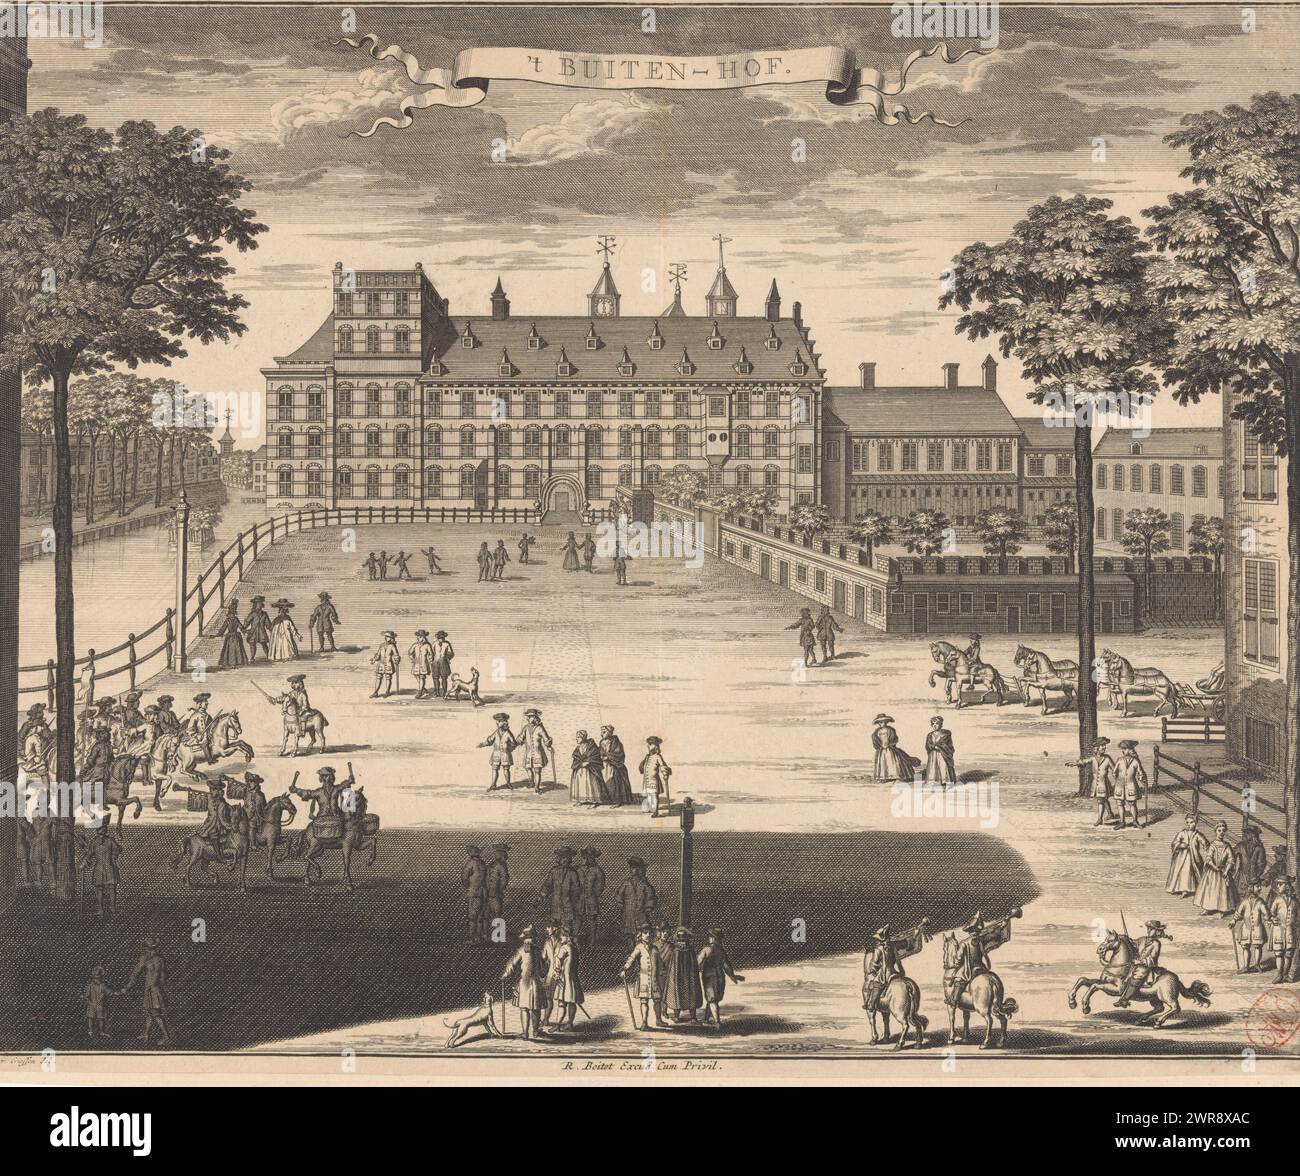 View of the Buitenhof in The Hague, 't Buiten-hof (title on object), View of the Buitenhof in The Hague, with the Binnenhof in the background. Various figures and riders in the Buitenhof., print maker: anonymous, after drawing by: Gerrit van Giessen, publisher: Reinier Boitet, after drawing by: The Hague, publisher: Delft, publisher: Amsterdam, 1730 - 1736, paper, etching, engraving, height 281 mm × width 348 mm, print Stock Photo